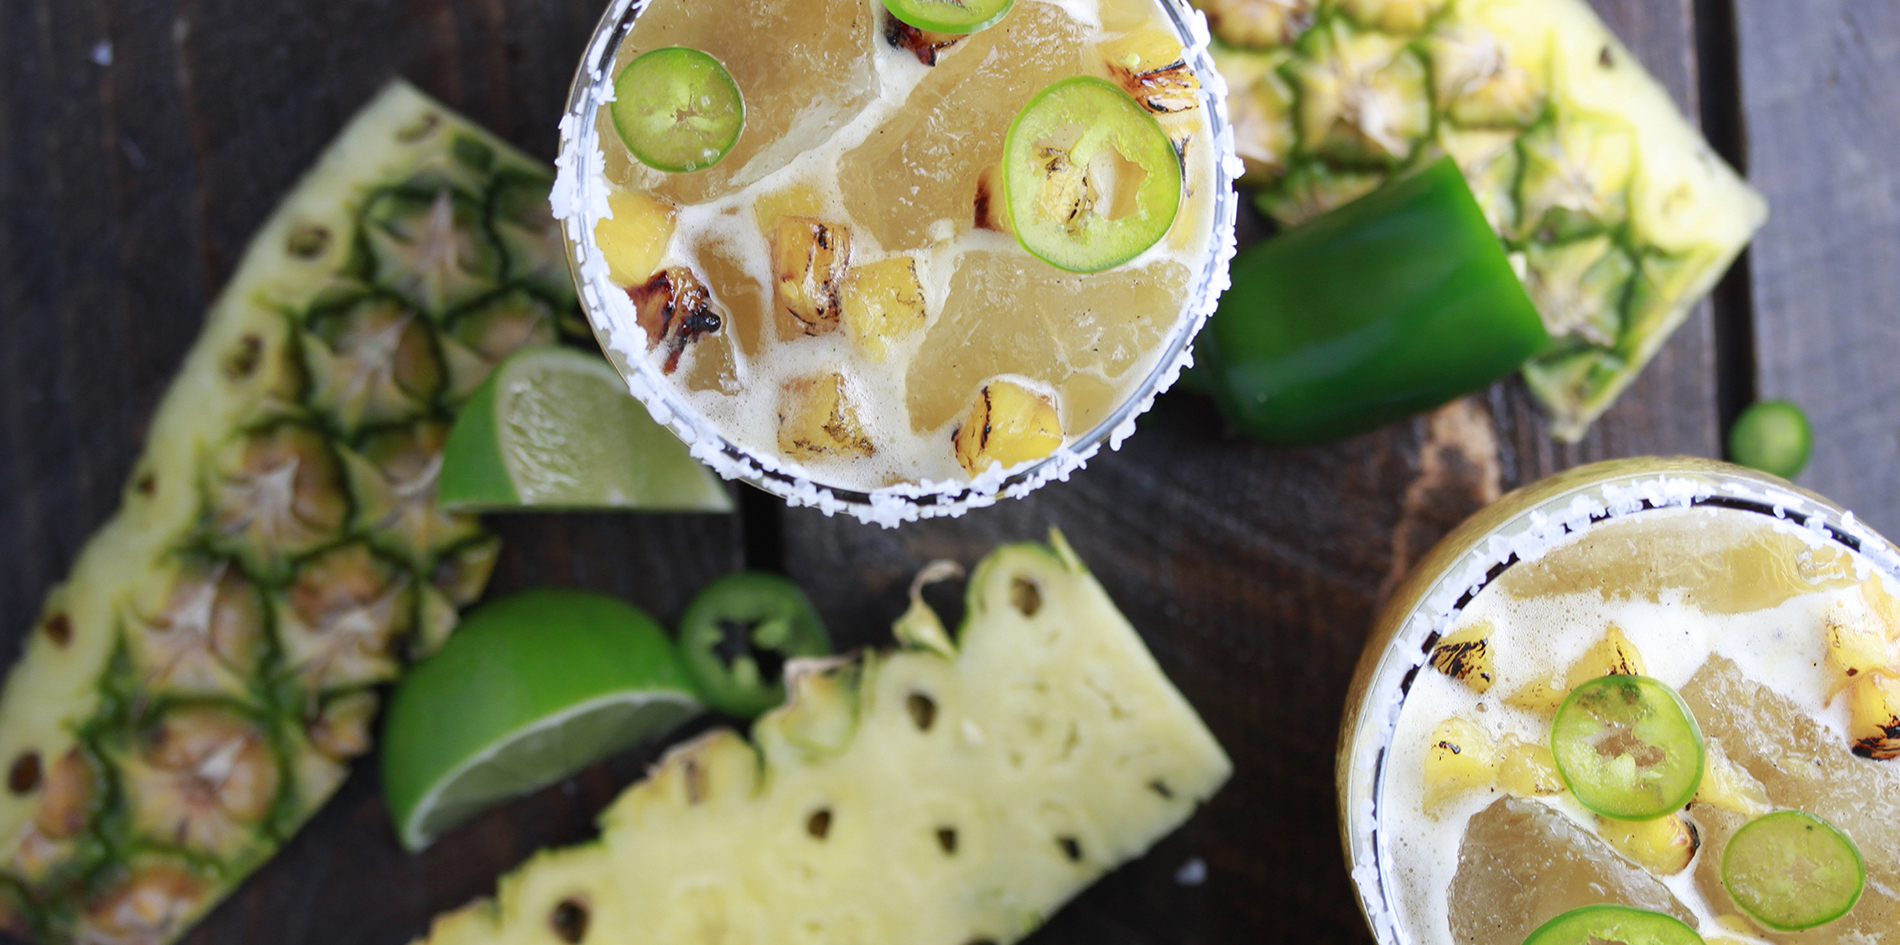 Spicy Pineapple Margarita features fire roasted pineapple purée with roasted pineapple and jalapeño